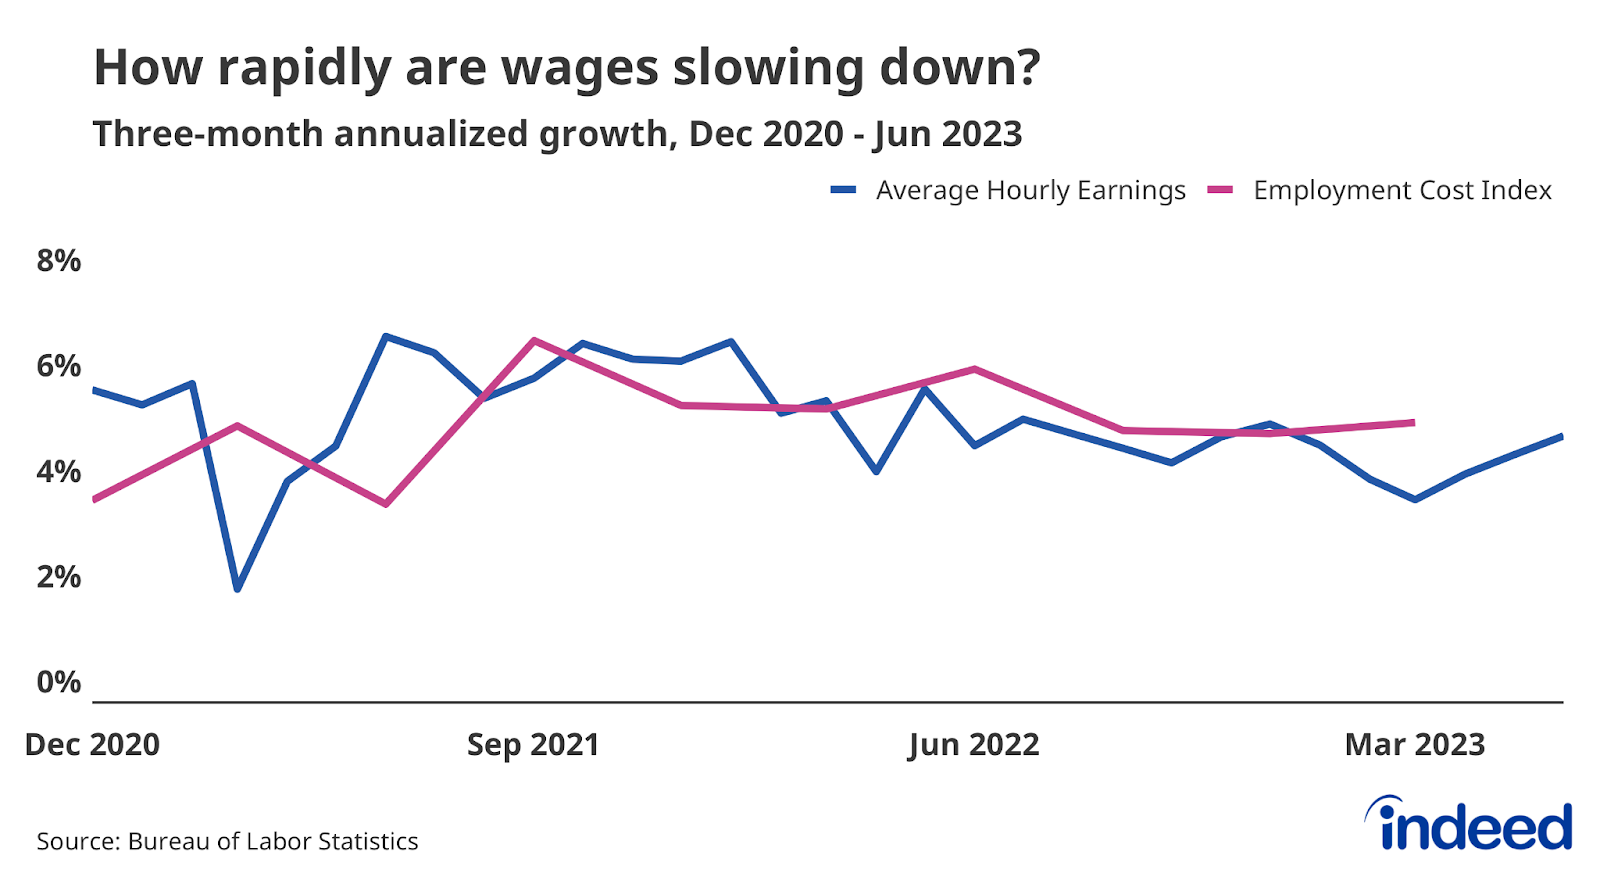 Line graph titled “How rapidly are wages slowing down” with a vertical axis from 0% to 8%. The graph shows the three-month annualized wage growth according to Average Hourly Earnings data and the Employment Cost Index. Both series show nominal wages slowing from their early 2022 pace, but the slowdown in 2023 is slight.